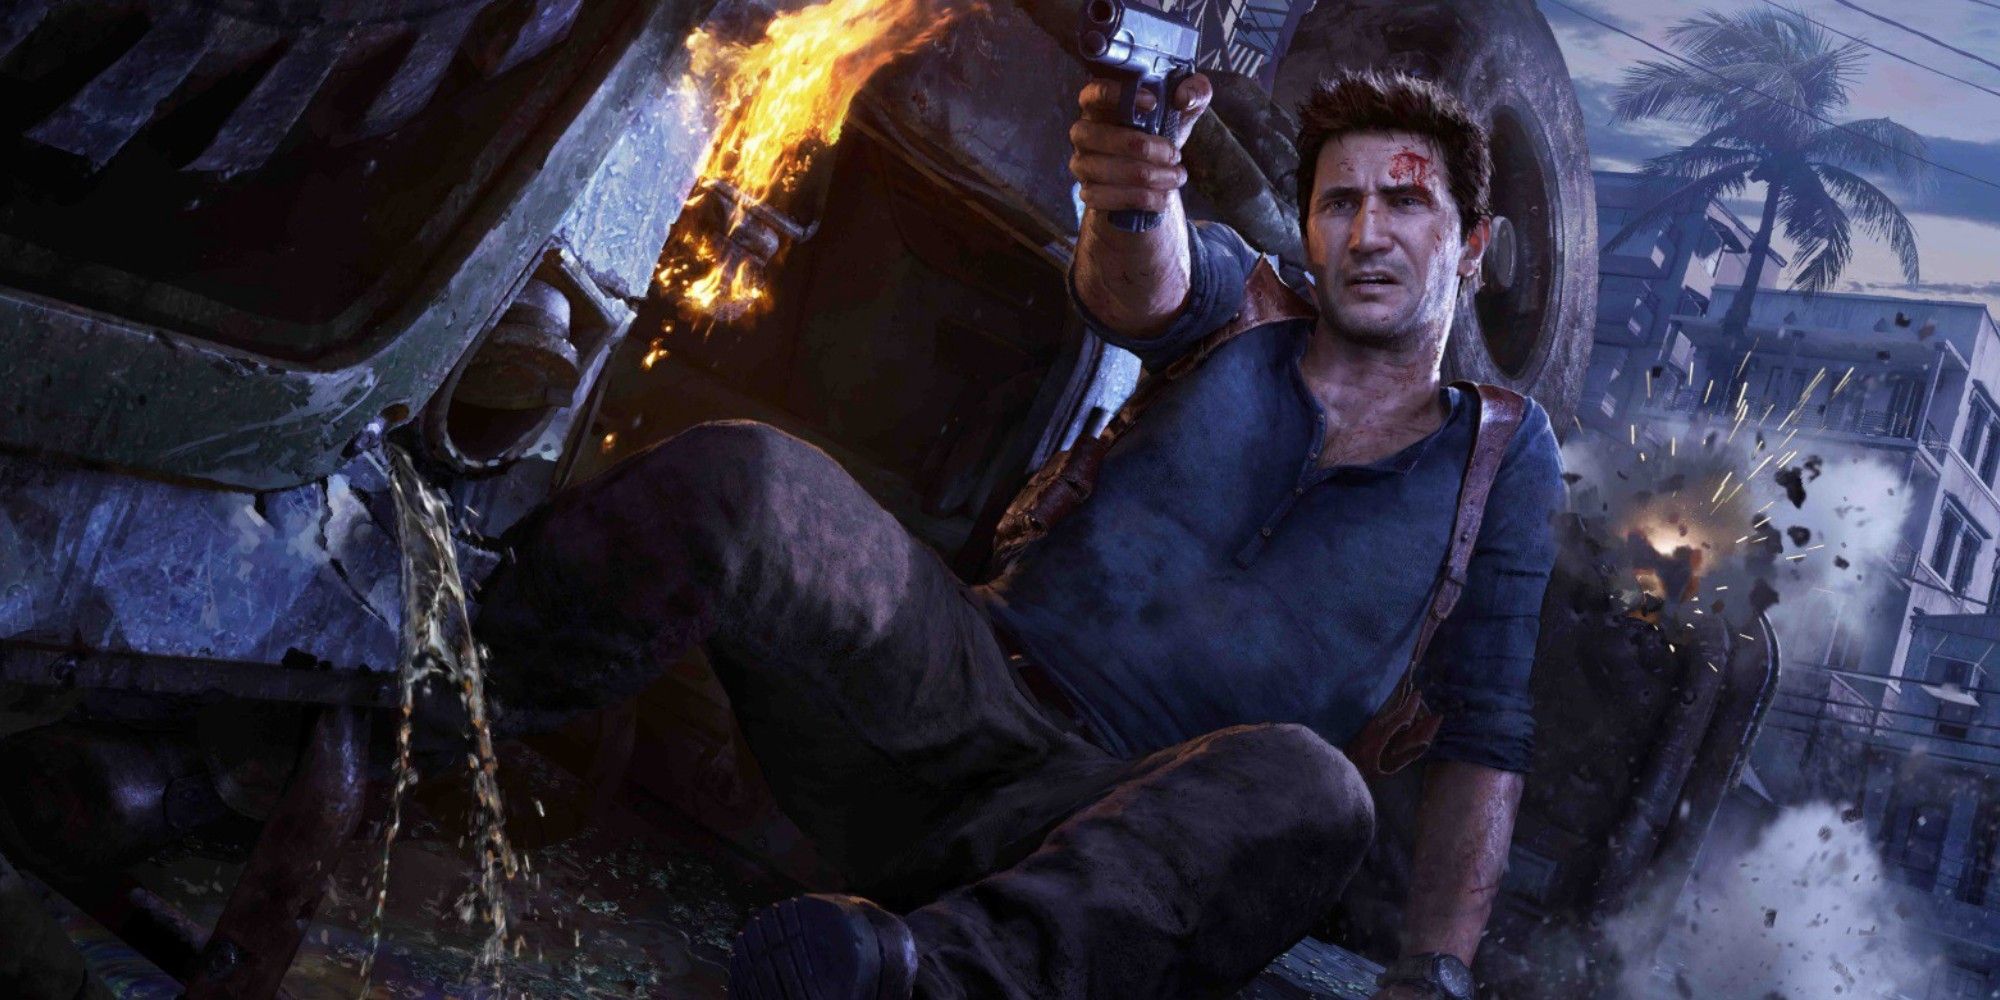 Nate in Uncharted 4.